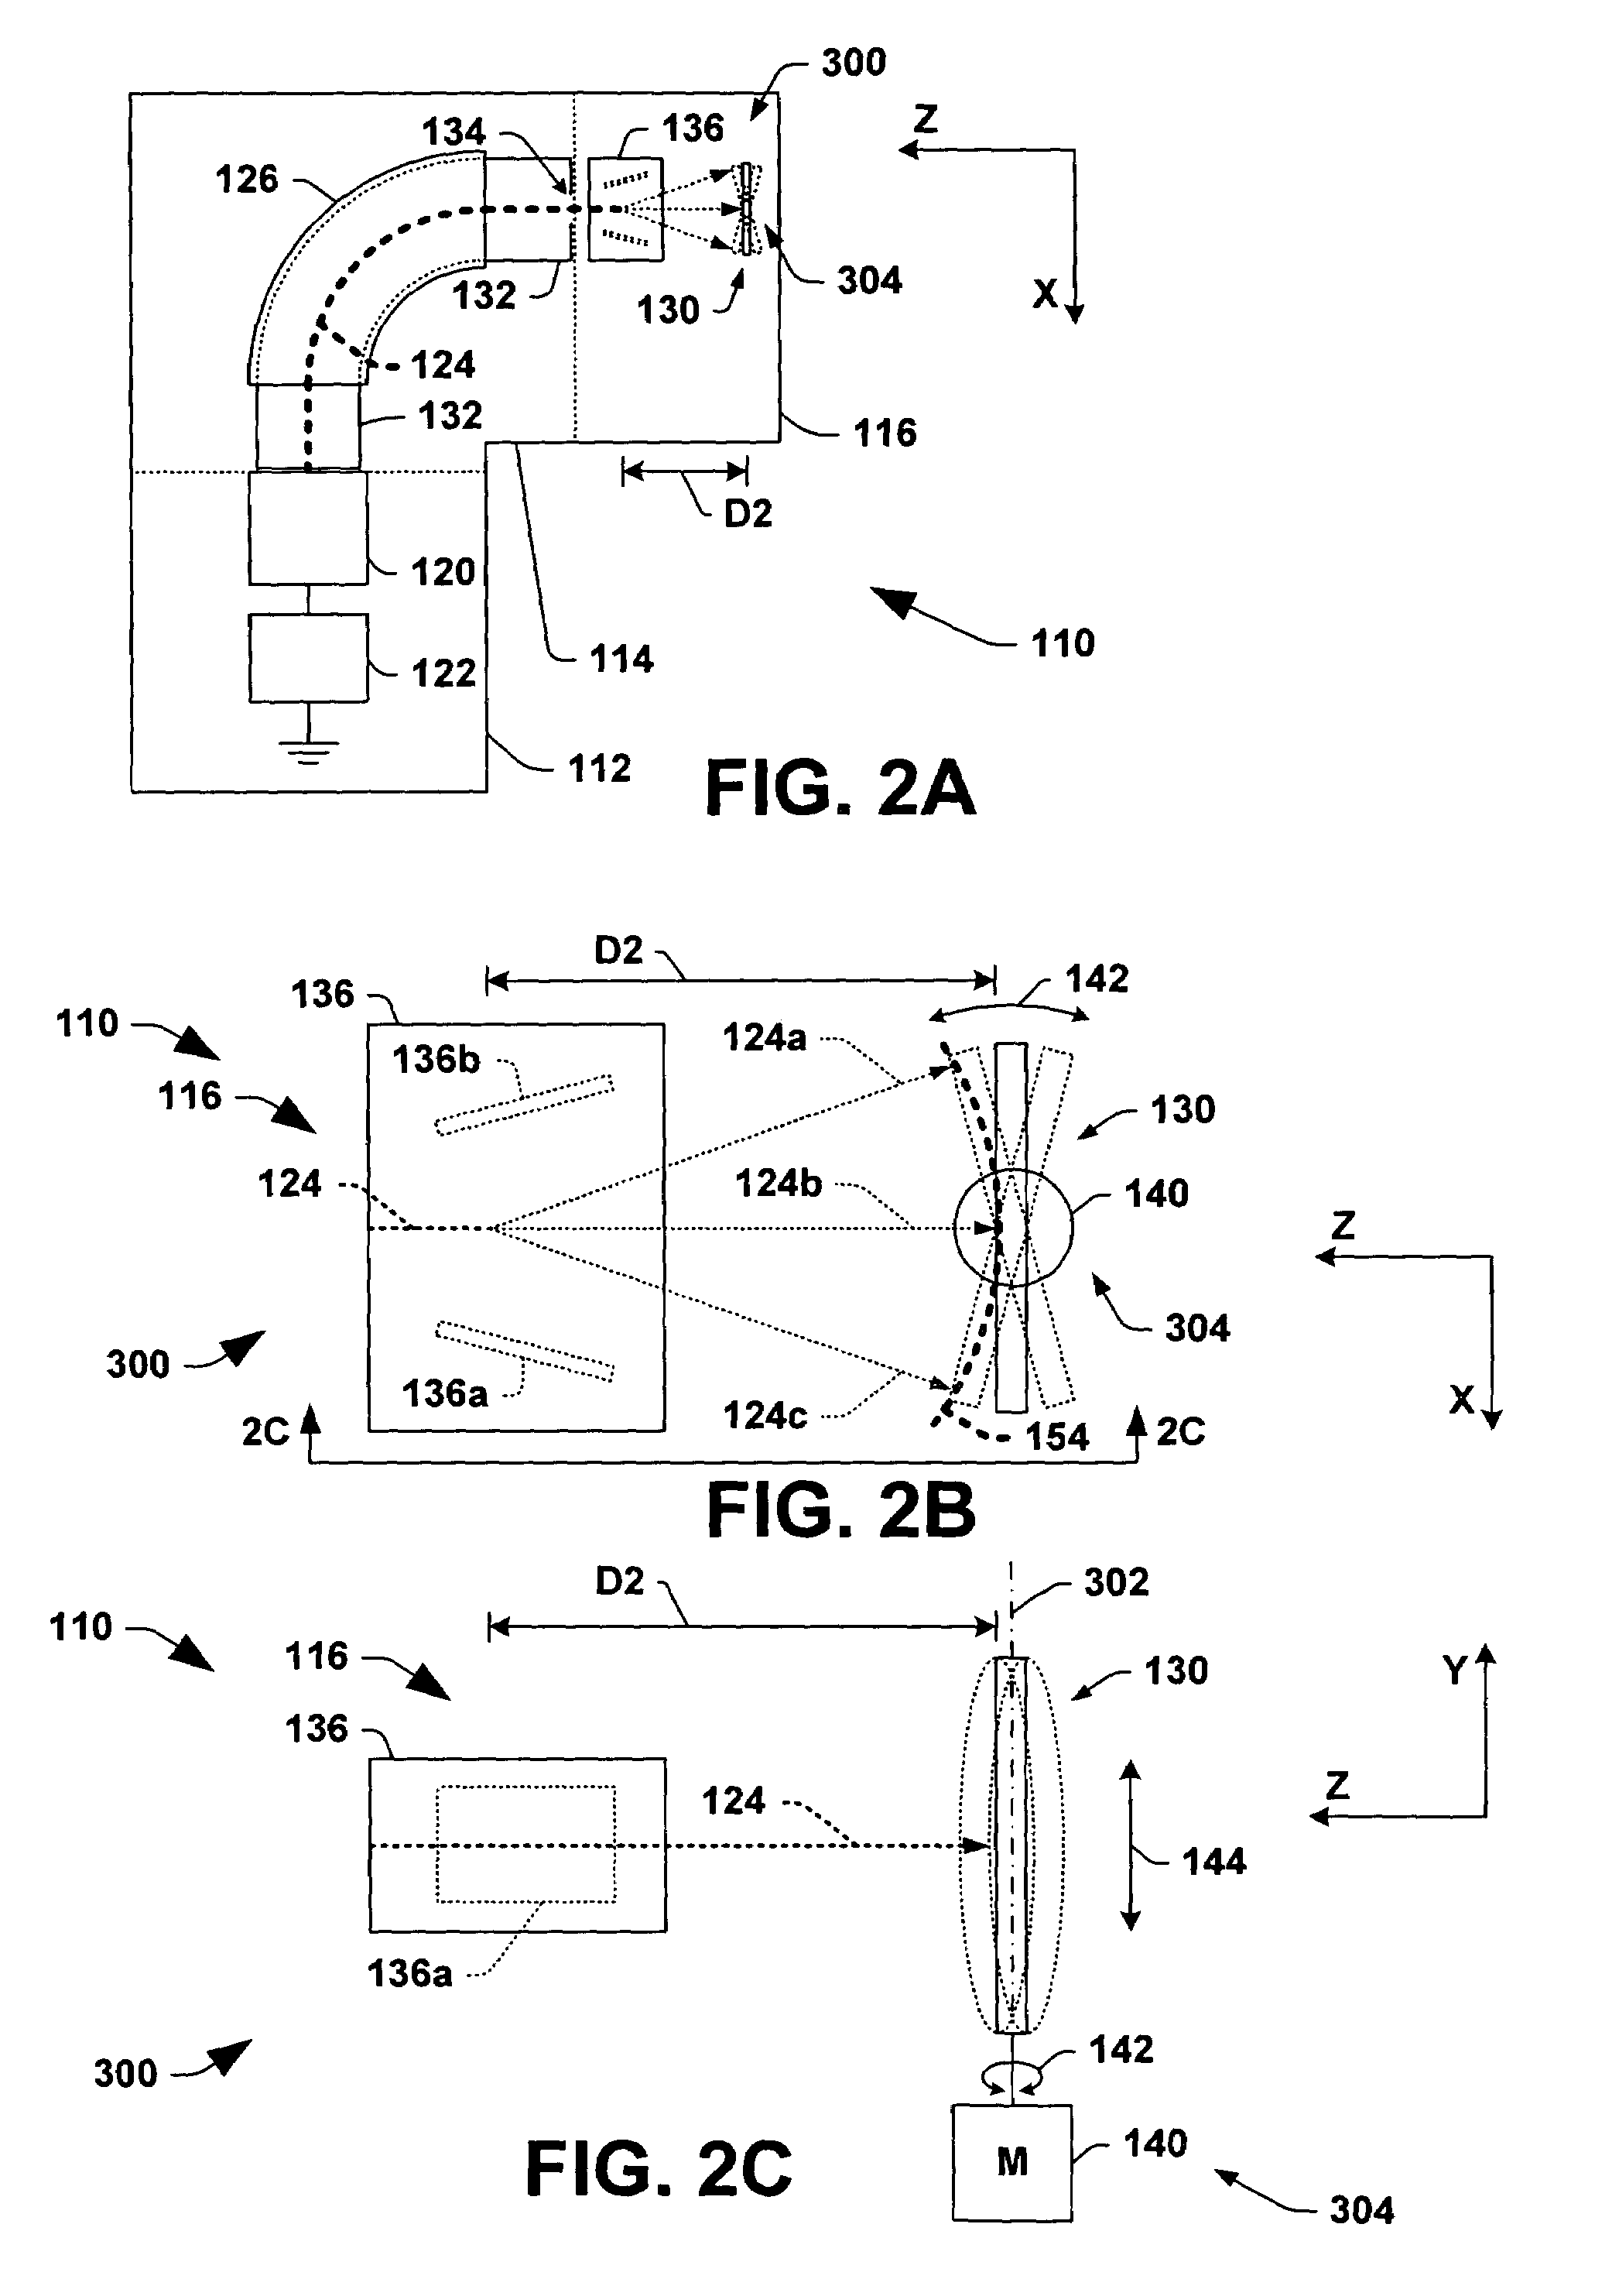 Ion beam measurement systems and methods for ion implant dose and uniformity control